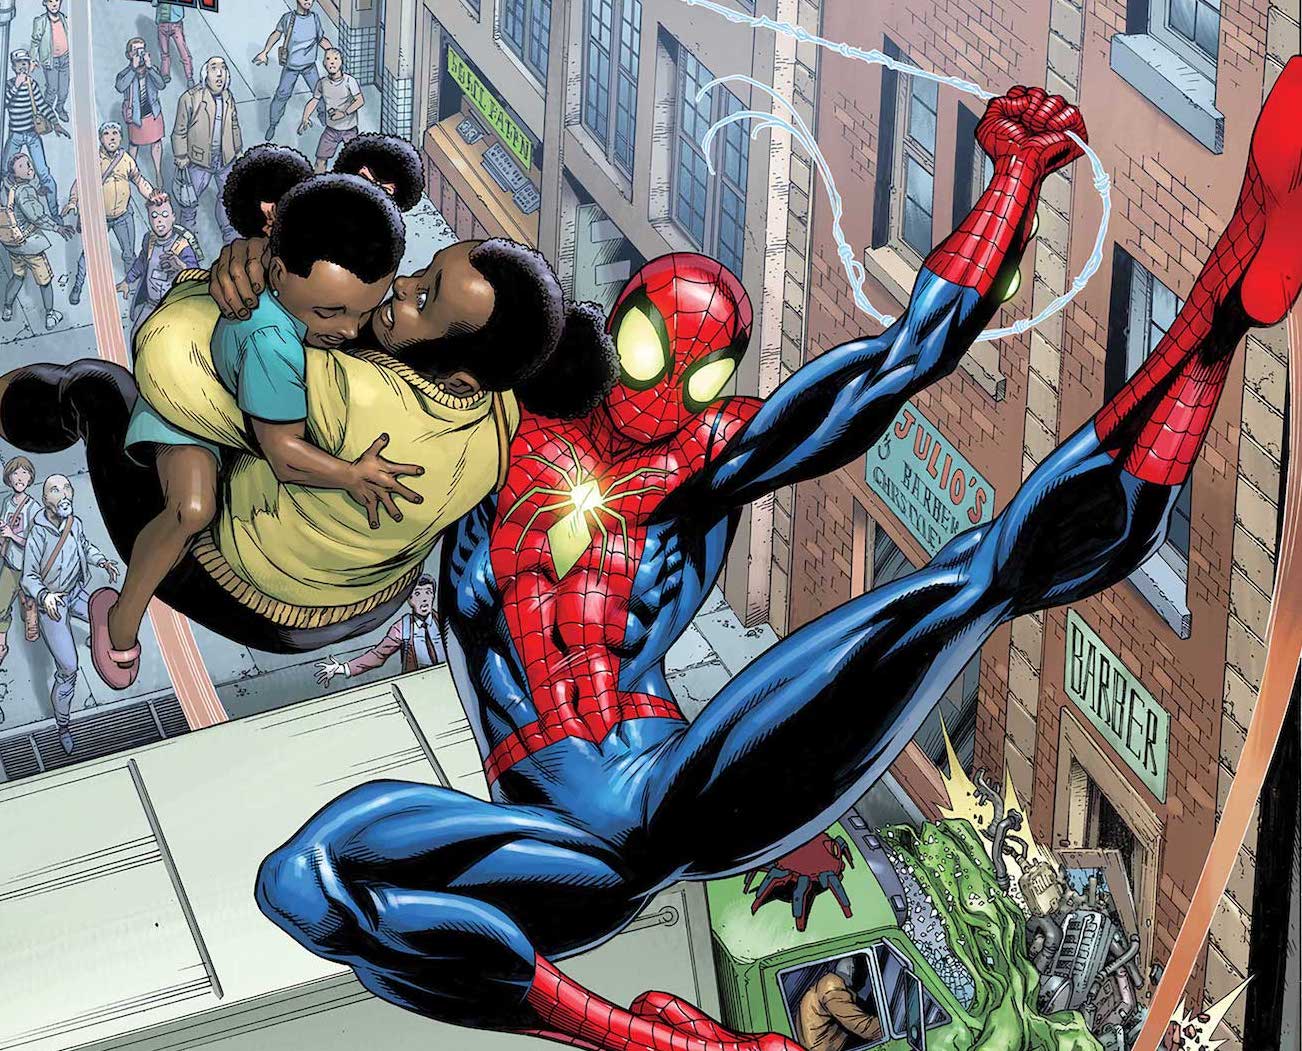 Dan Slott and Mark Bagley team up on 'Spider-Man' ongoing series